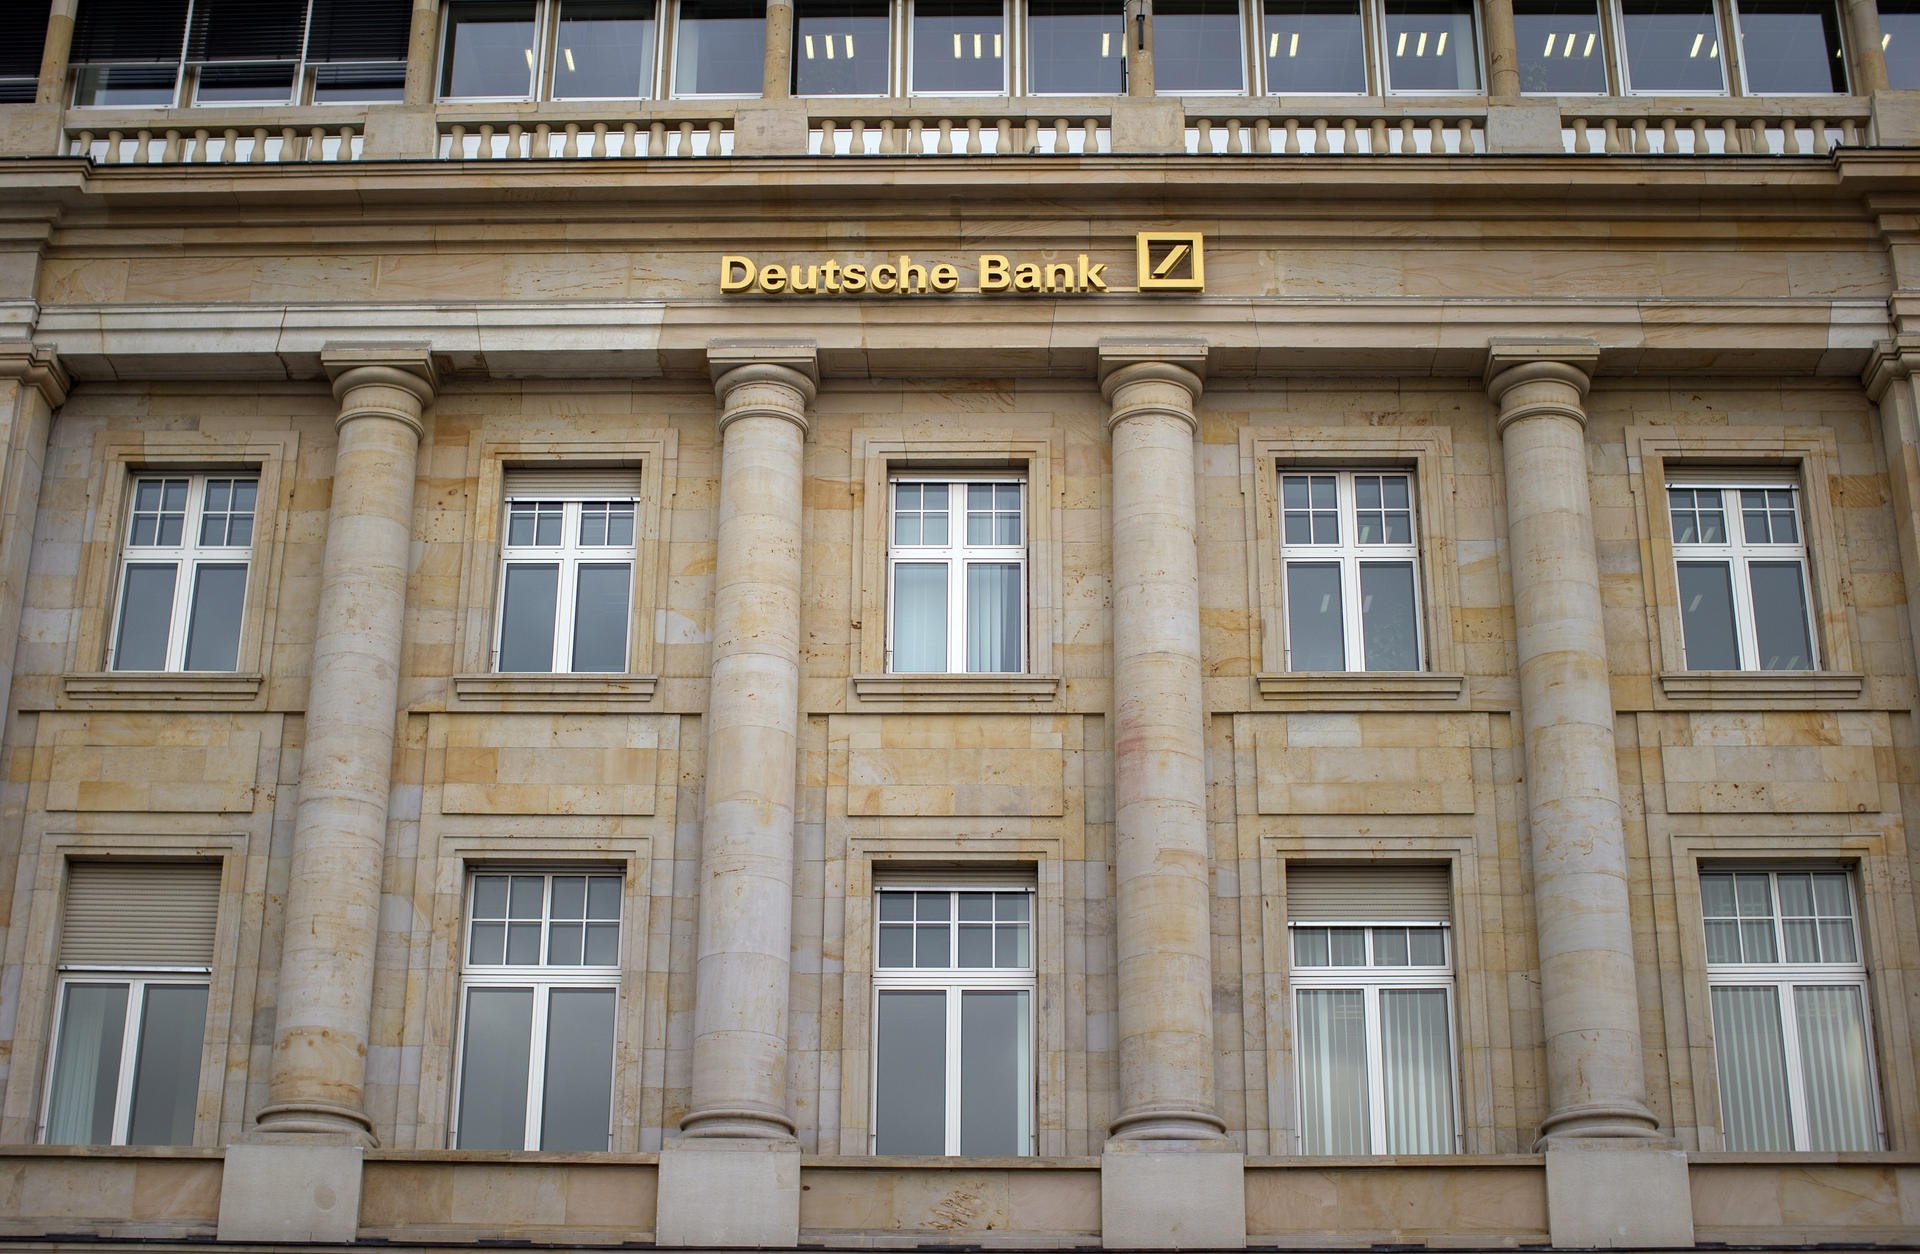 Deutsche Bank announced in September that it would close most of its operations in Russia as part of a bigger drive to reduce complexity, costs and risk. Photo: Bloomberg